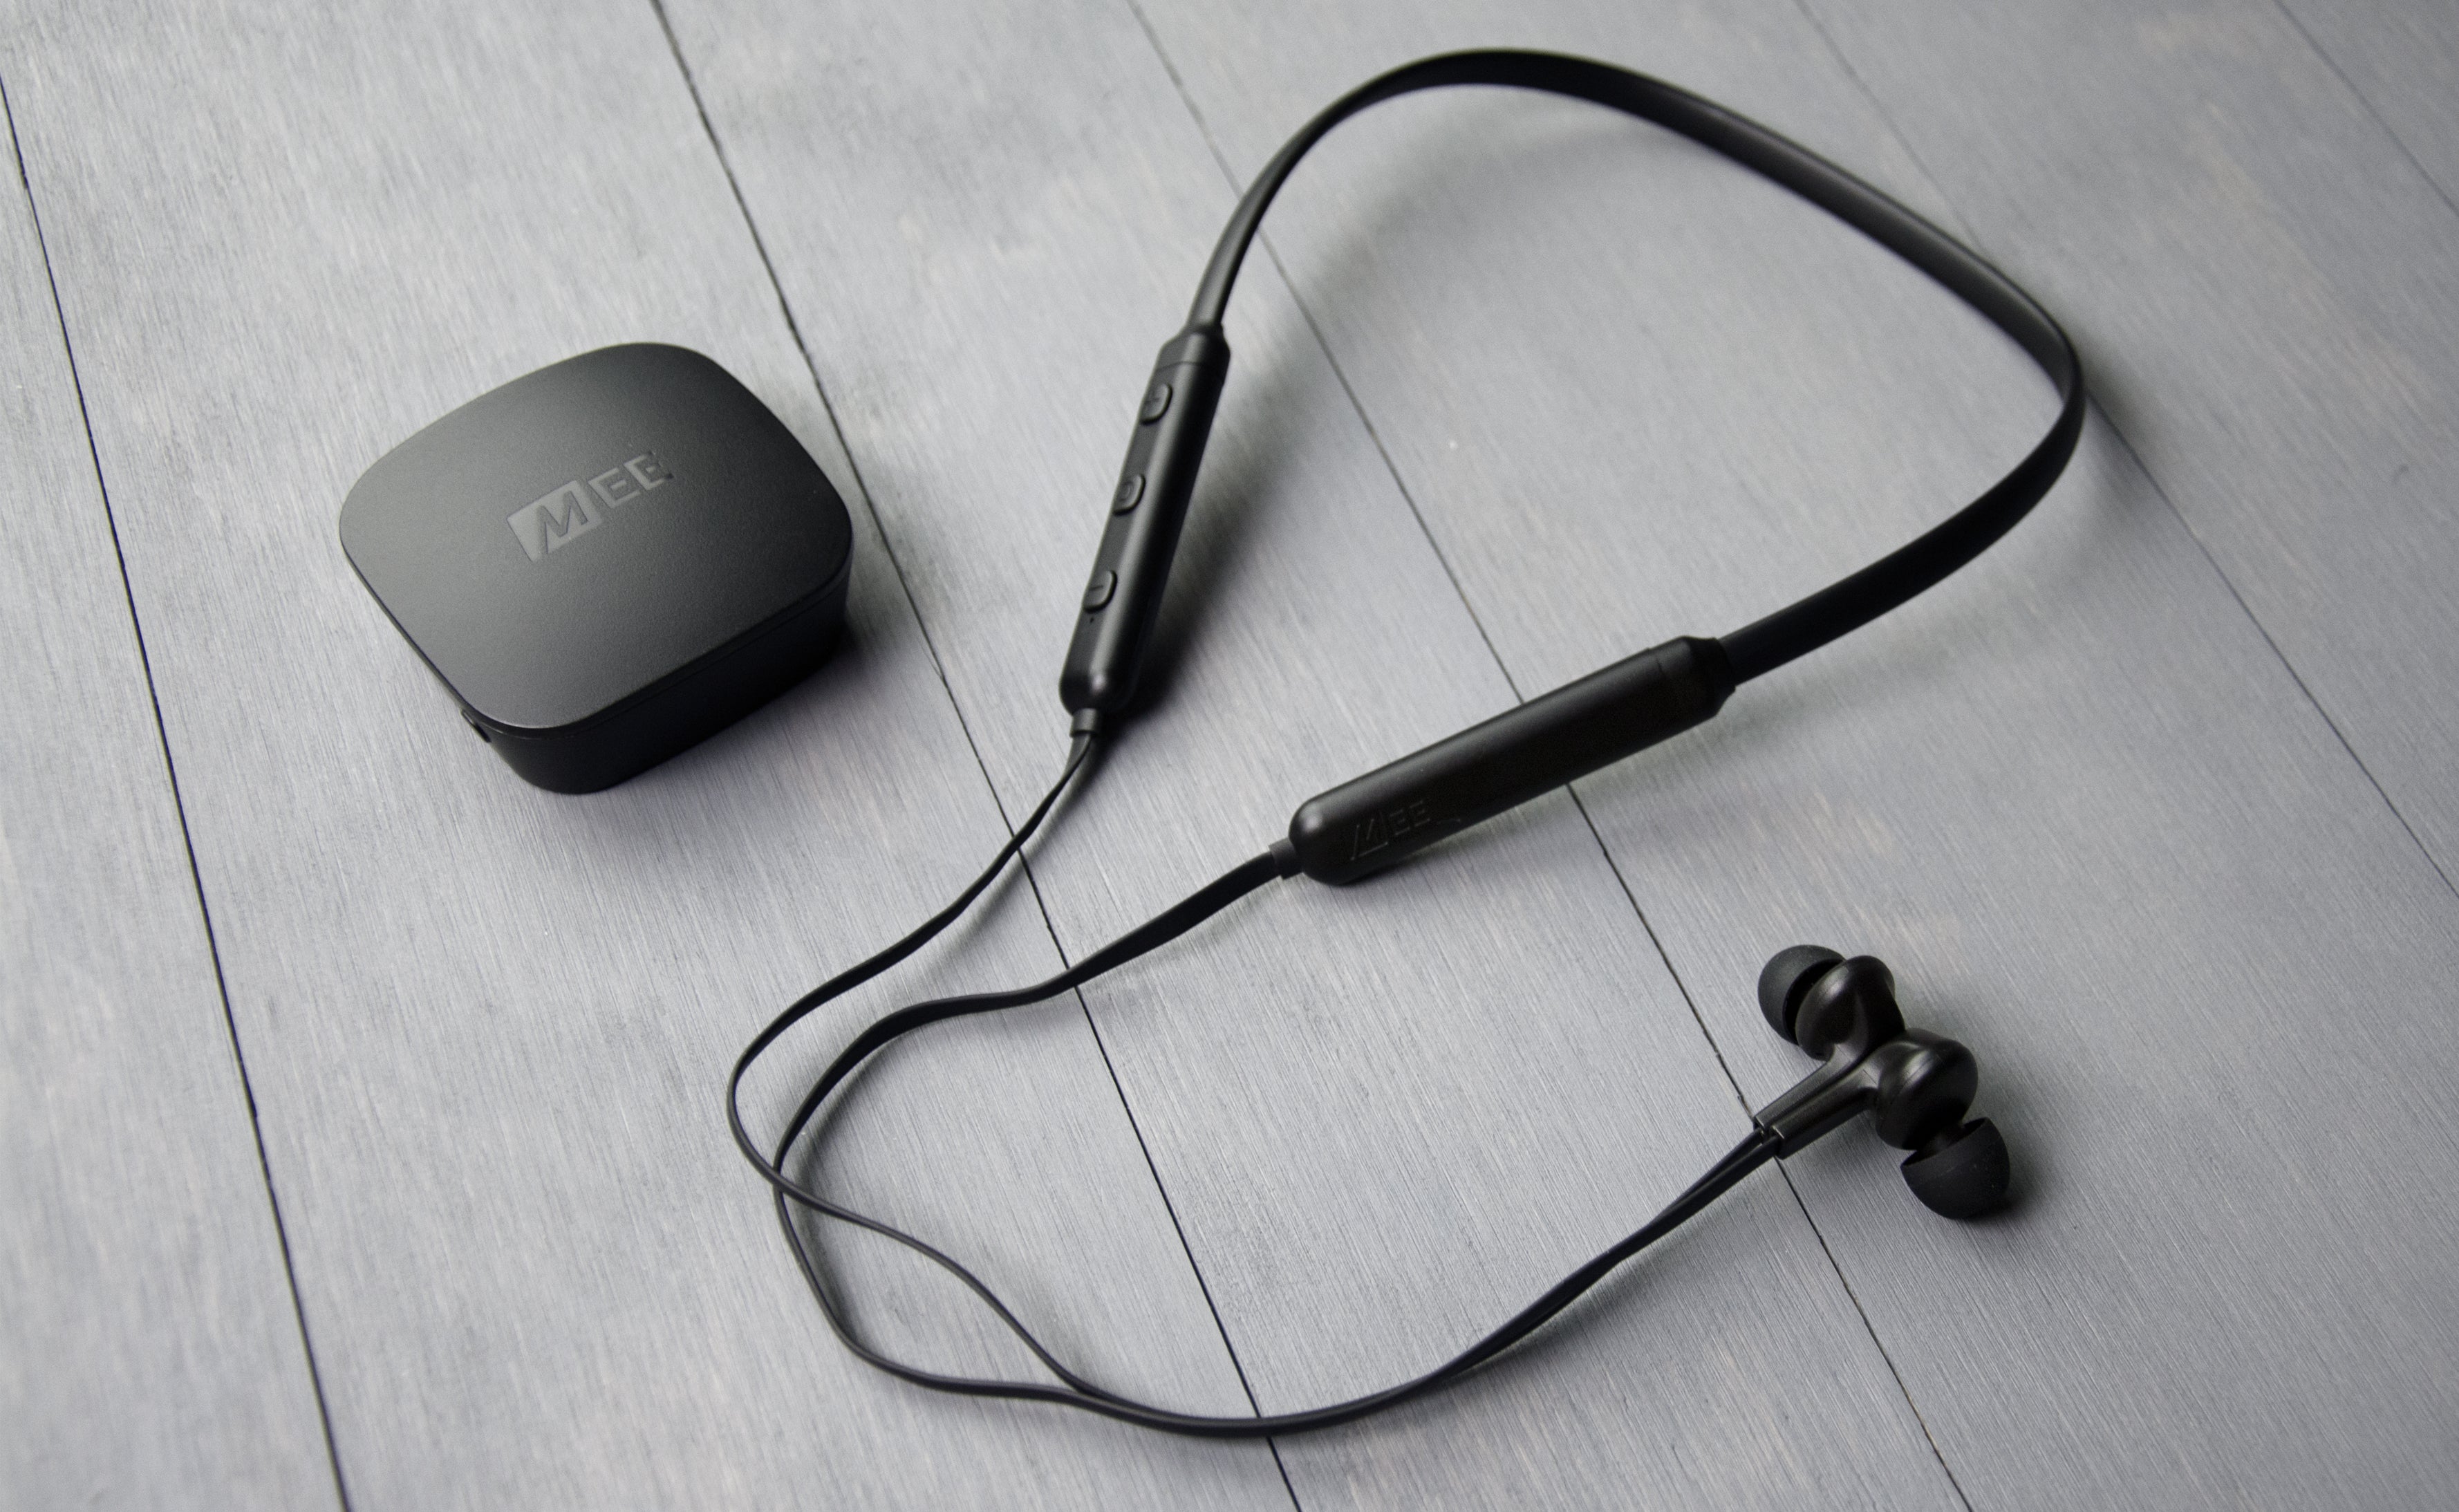 Wireless neckband earphones with inline controls and magnetic earbuds next to their charging case, resting on a gray wooden surface.